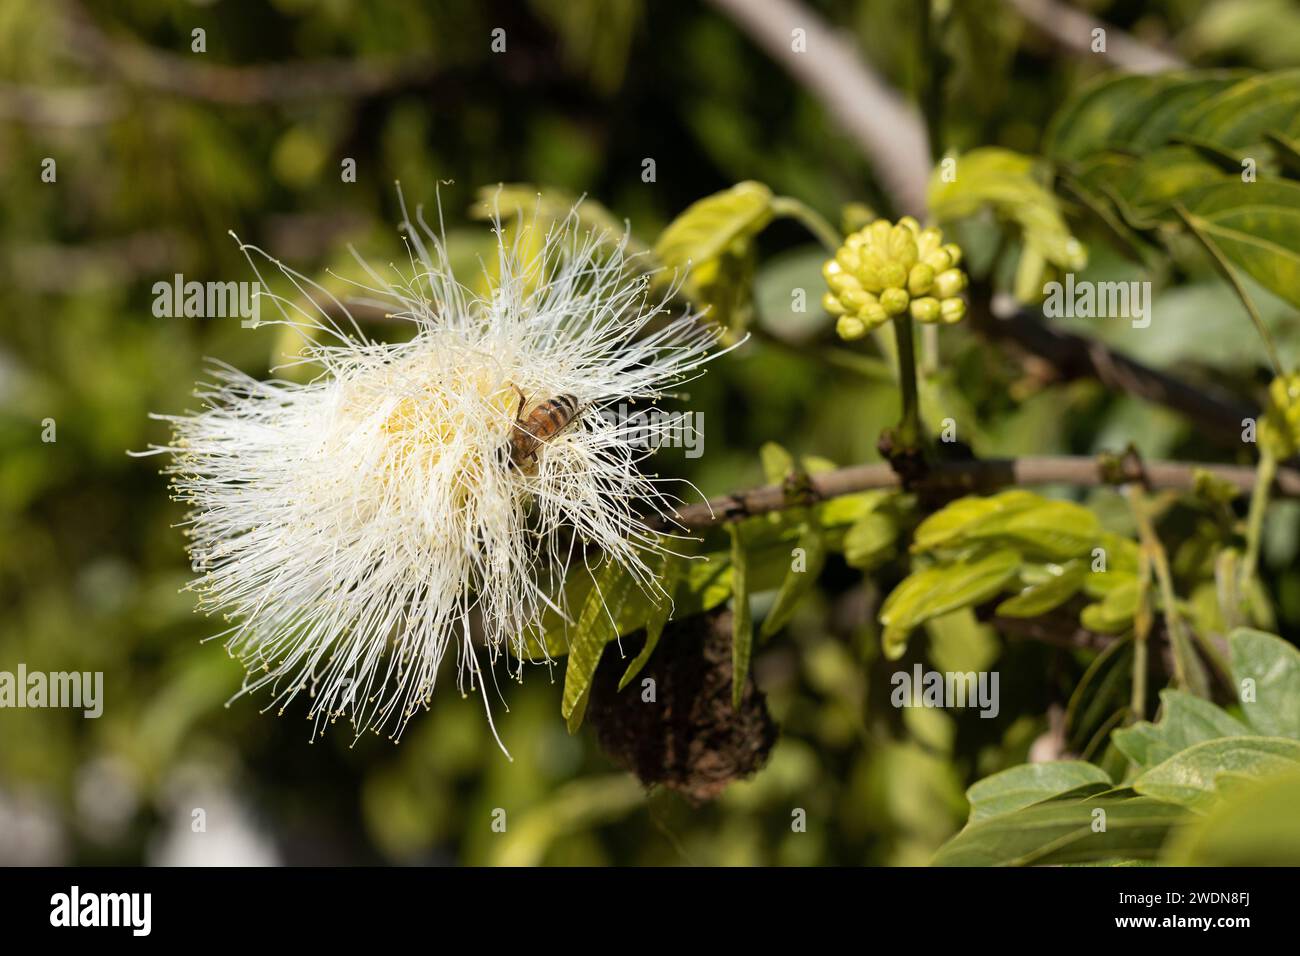 Bees on a flower of a Albizia lebbeck tree. Stock Photo